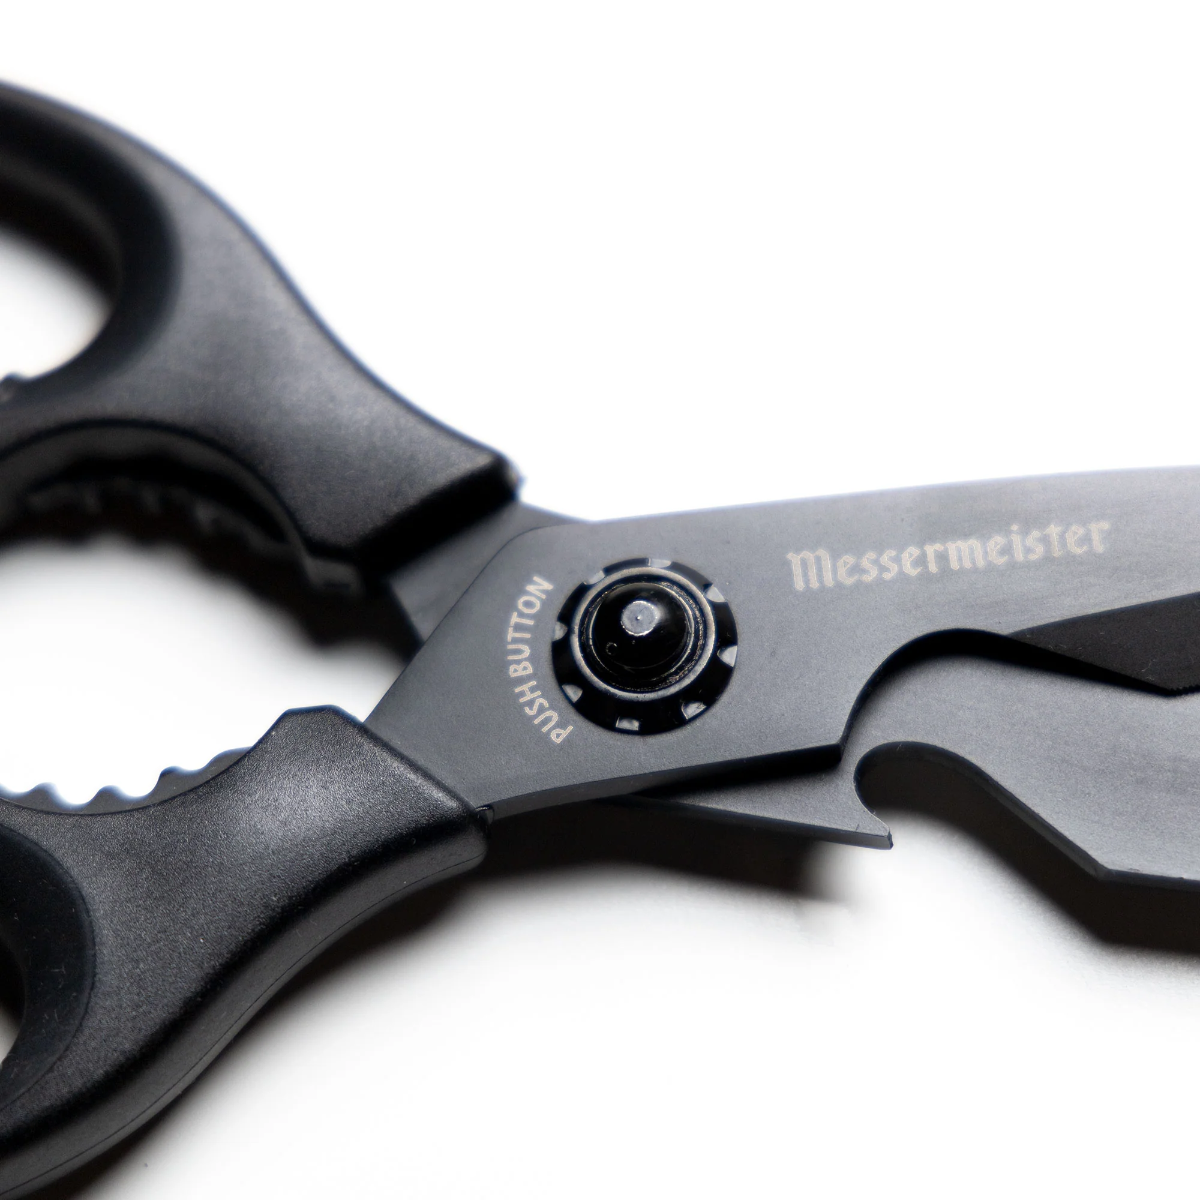 Close-up image of the Messermeister 9" Push Button Take-Apart Shears. The shears feature a push-button mechanism for easy separation and cleaning. They have a sleek design with sharp blades and ergonomic handles, ideal for various cutting tasks in the kitchen. Displayed on a plain background, highlighting their functionality and design.